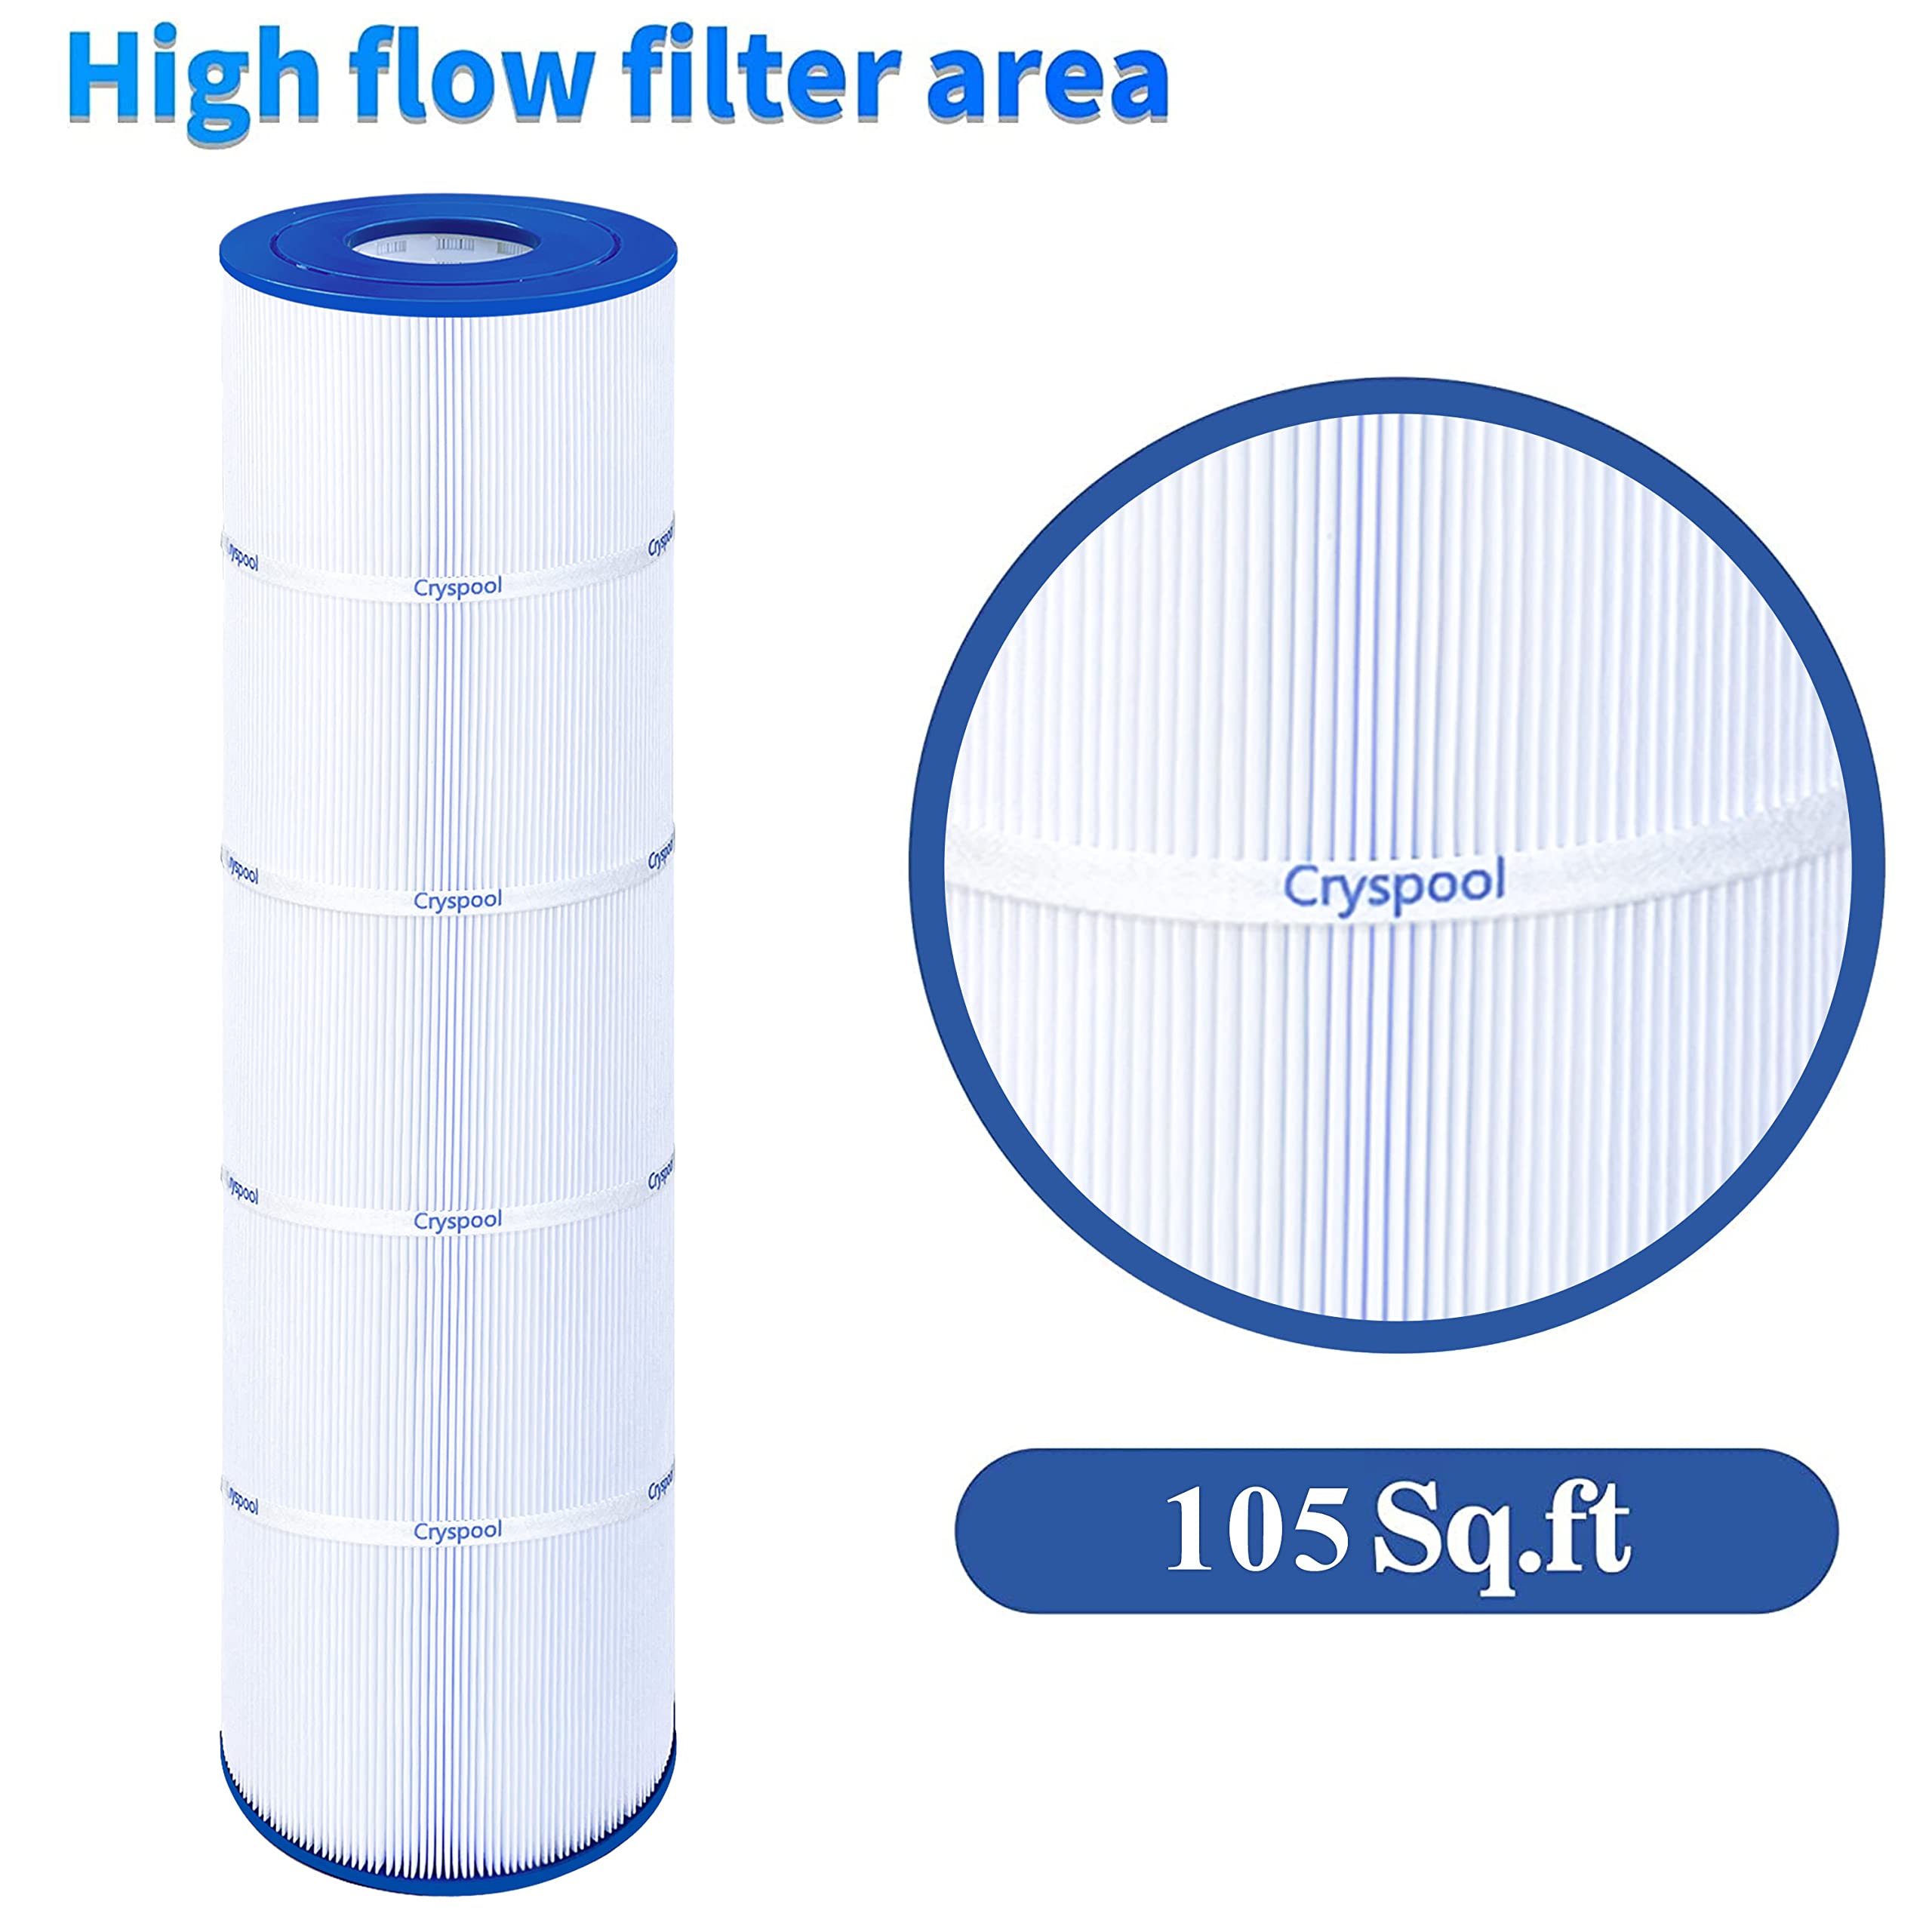 Cryspool Pool Filter Cartridge Compatible with CCP420,PCC105-PAK4, C-7471, R173576,178584, Clean and Clear Plus 420,817-0106, FC-6470,4 Pack